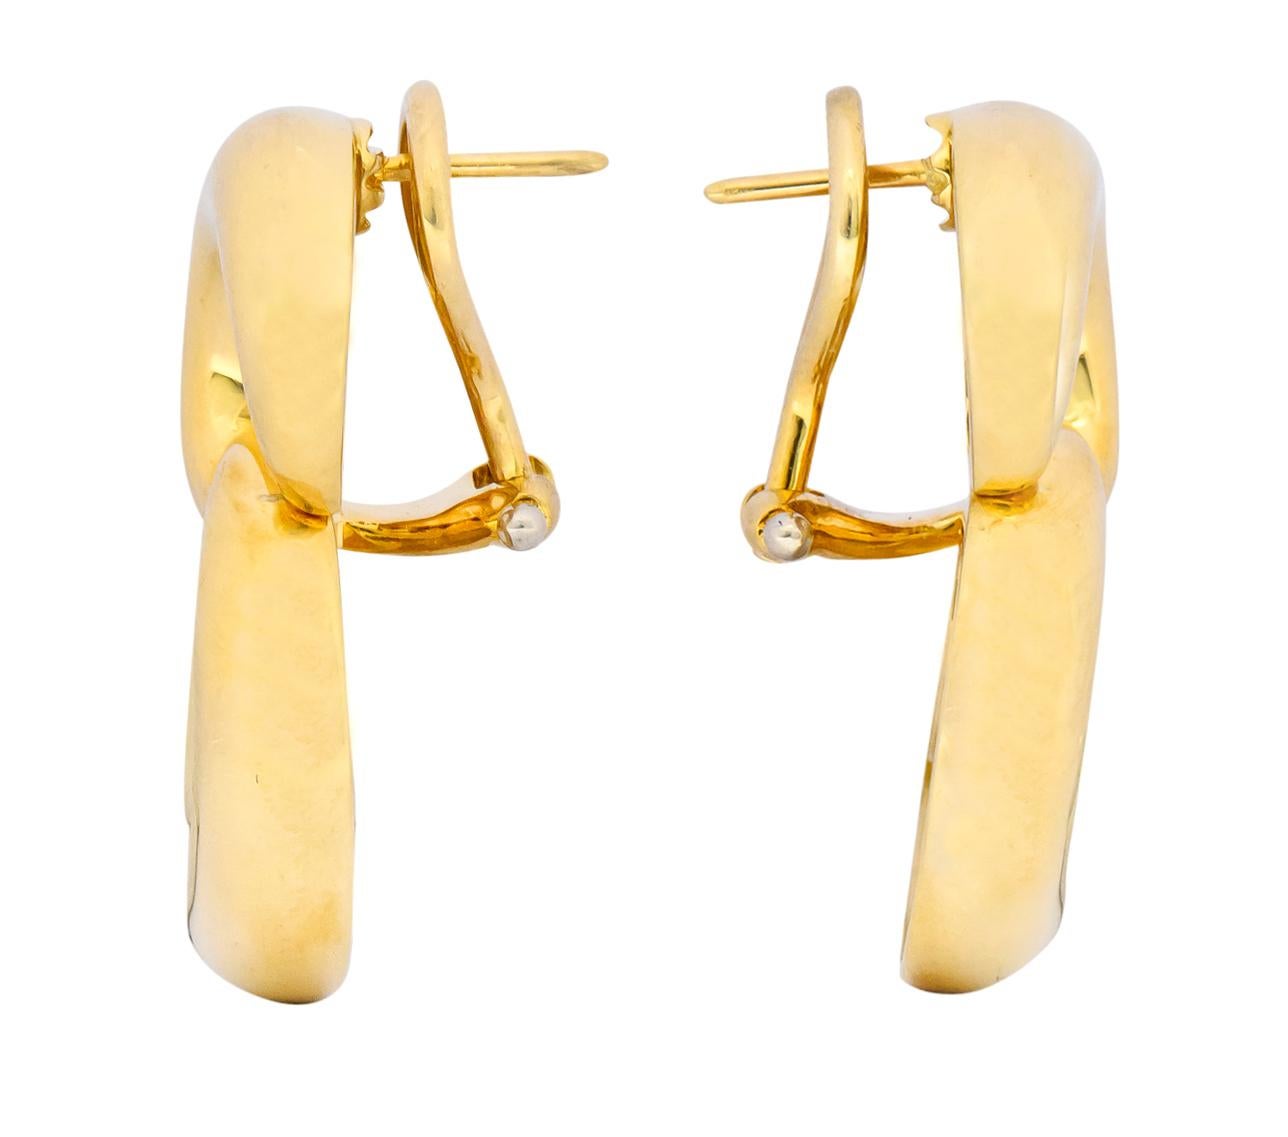 Each earring is designed as an articulated figure eight form

Hollow with a high polished finish

Completed by post and hinged omega back

Fully signed Tiffany & Co. 

Stamped 750 for 18 karat gold

Measures: 1 1/16 x 3/4 inch

Total weight: 19.2